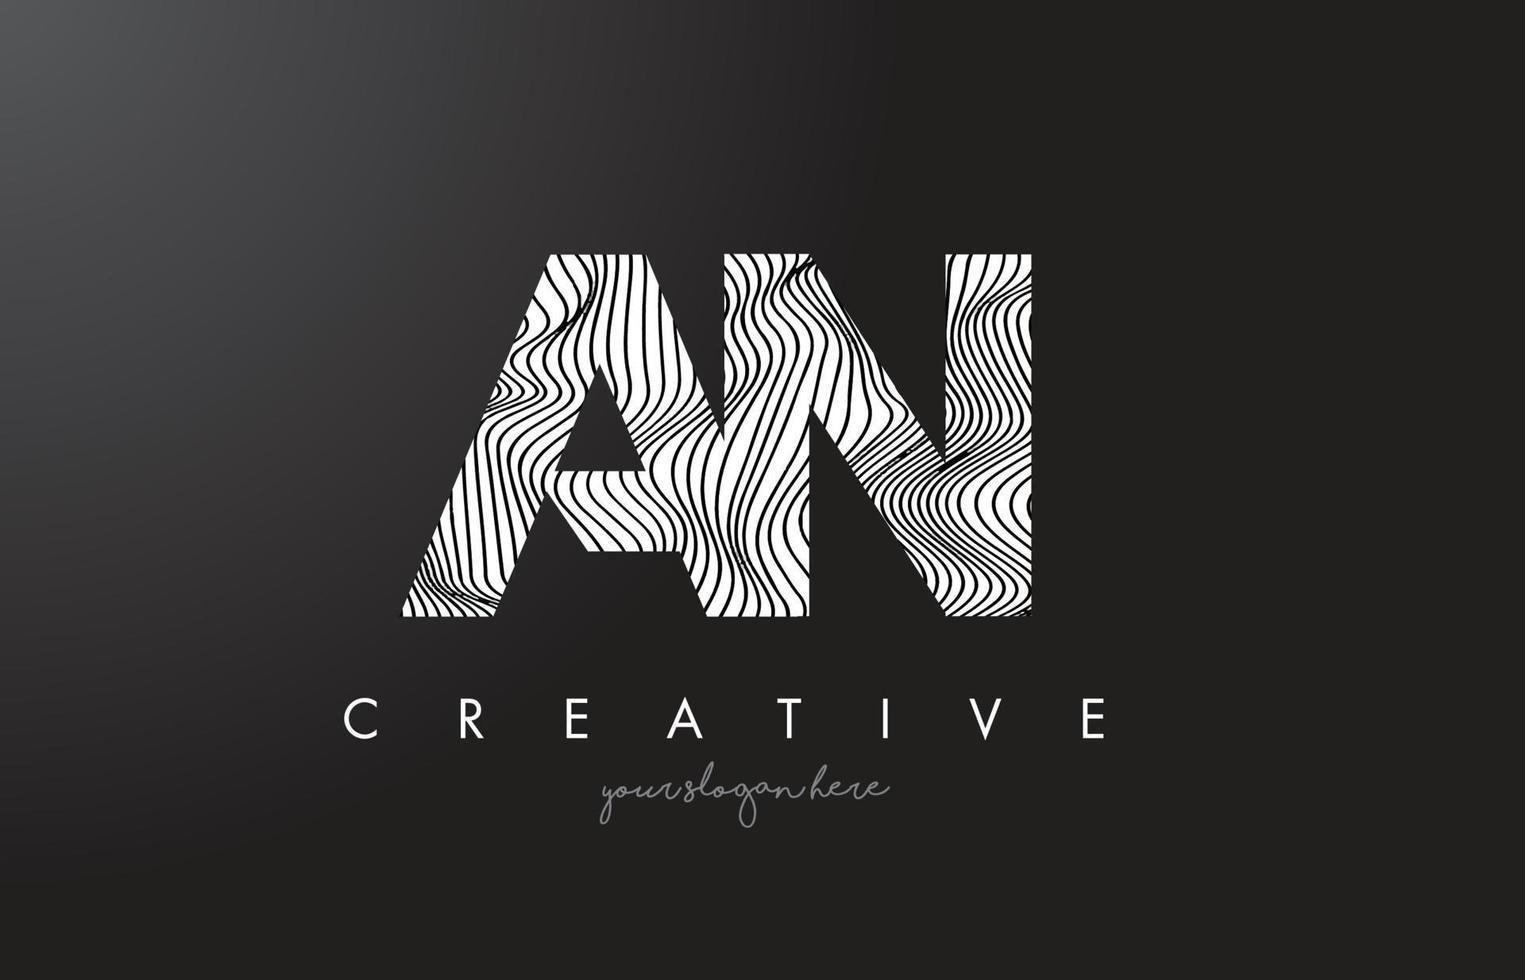 AN A N Letter Logo with Zebra Lines Texture Design Vector. vector